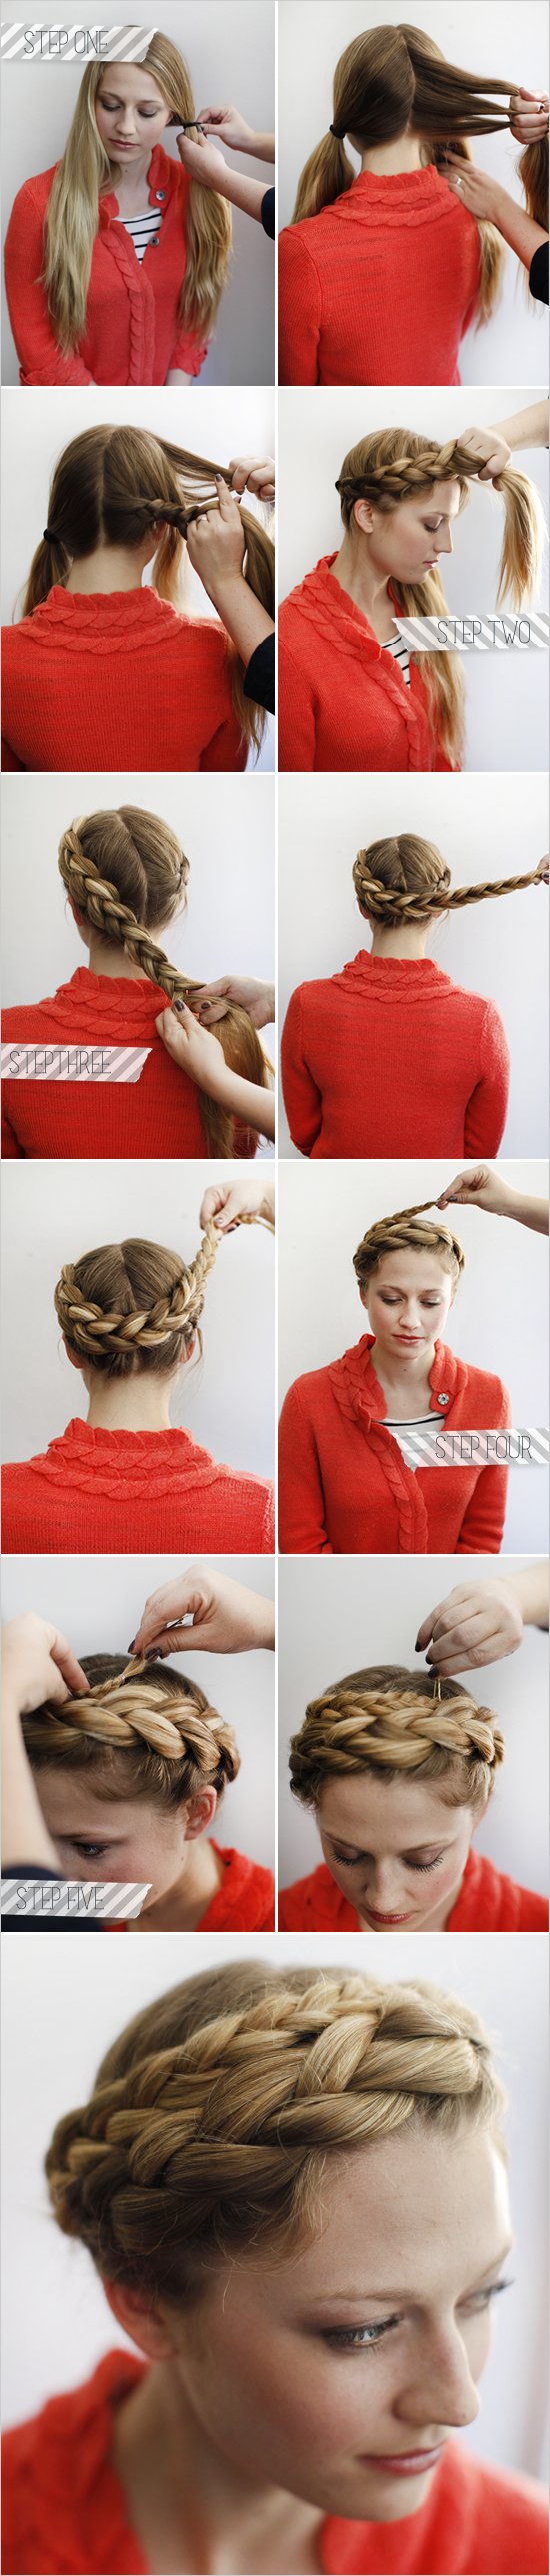 Braided Crown Hairstyle for Summer